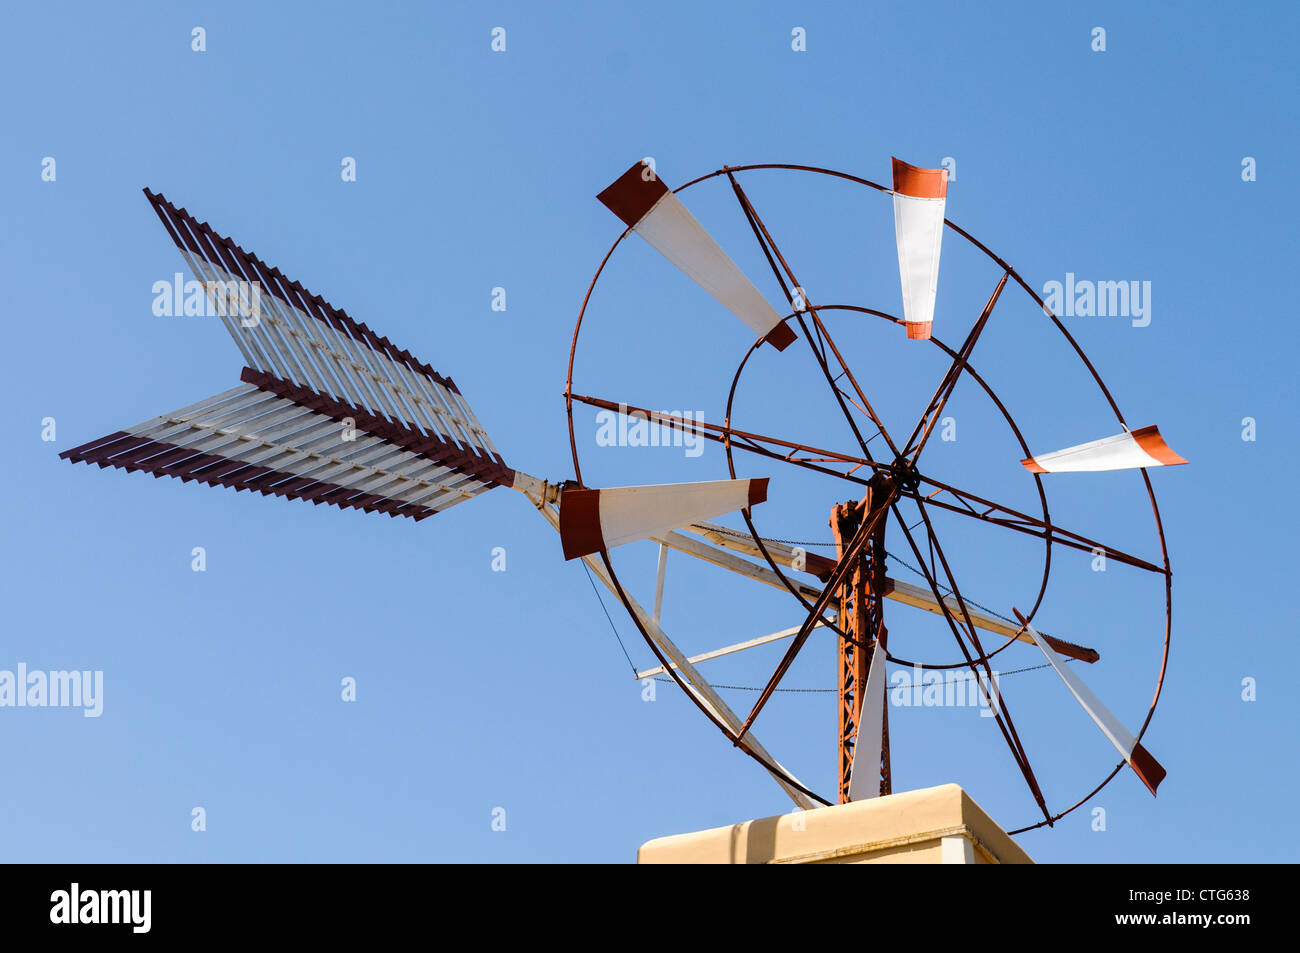 Wind turbine for producing electricity Stock Photo